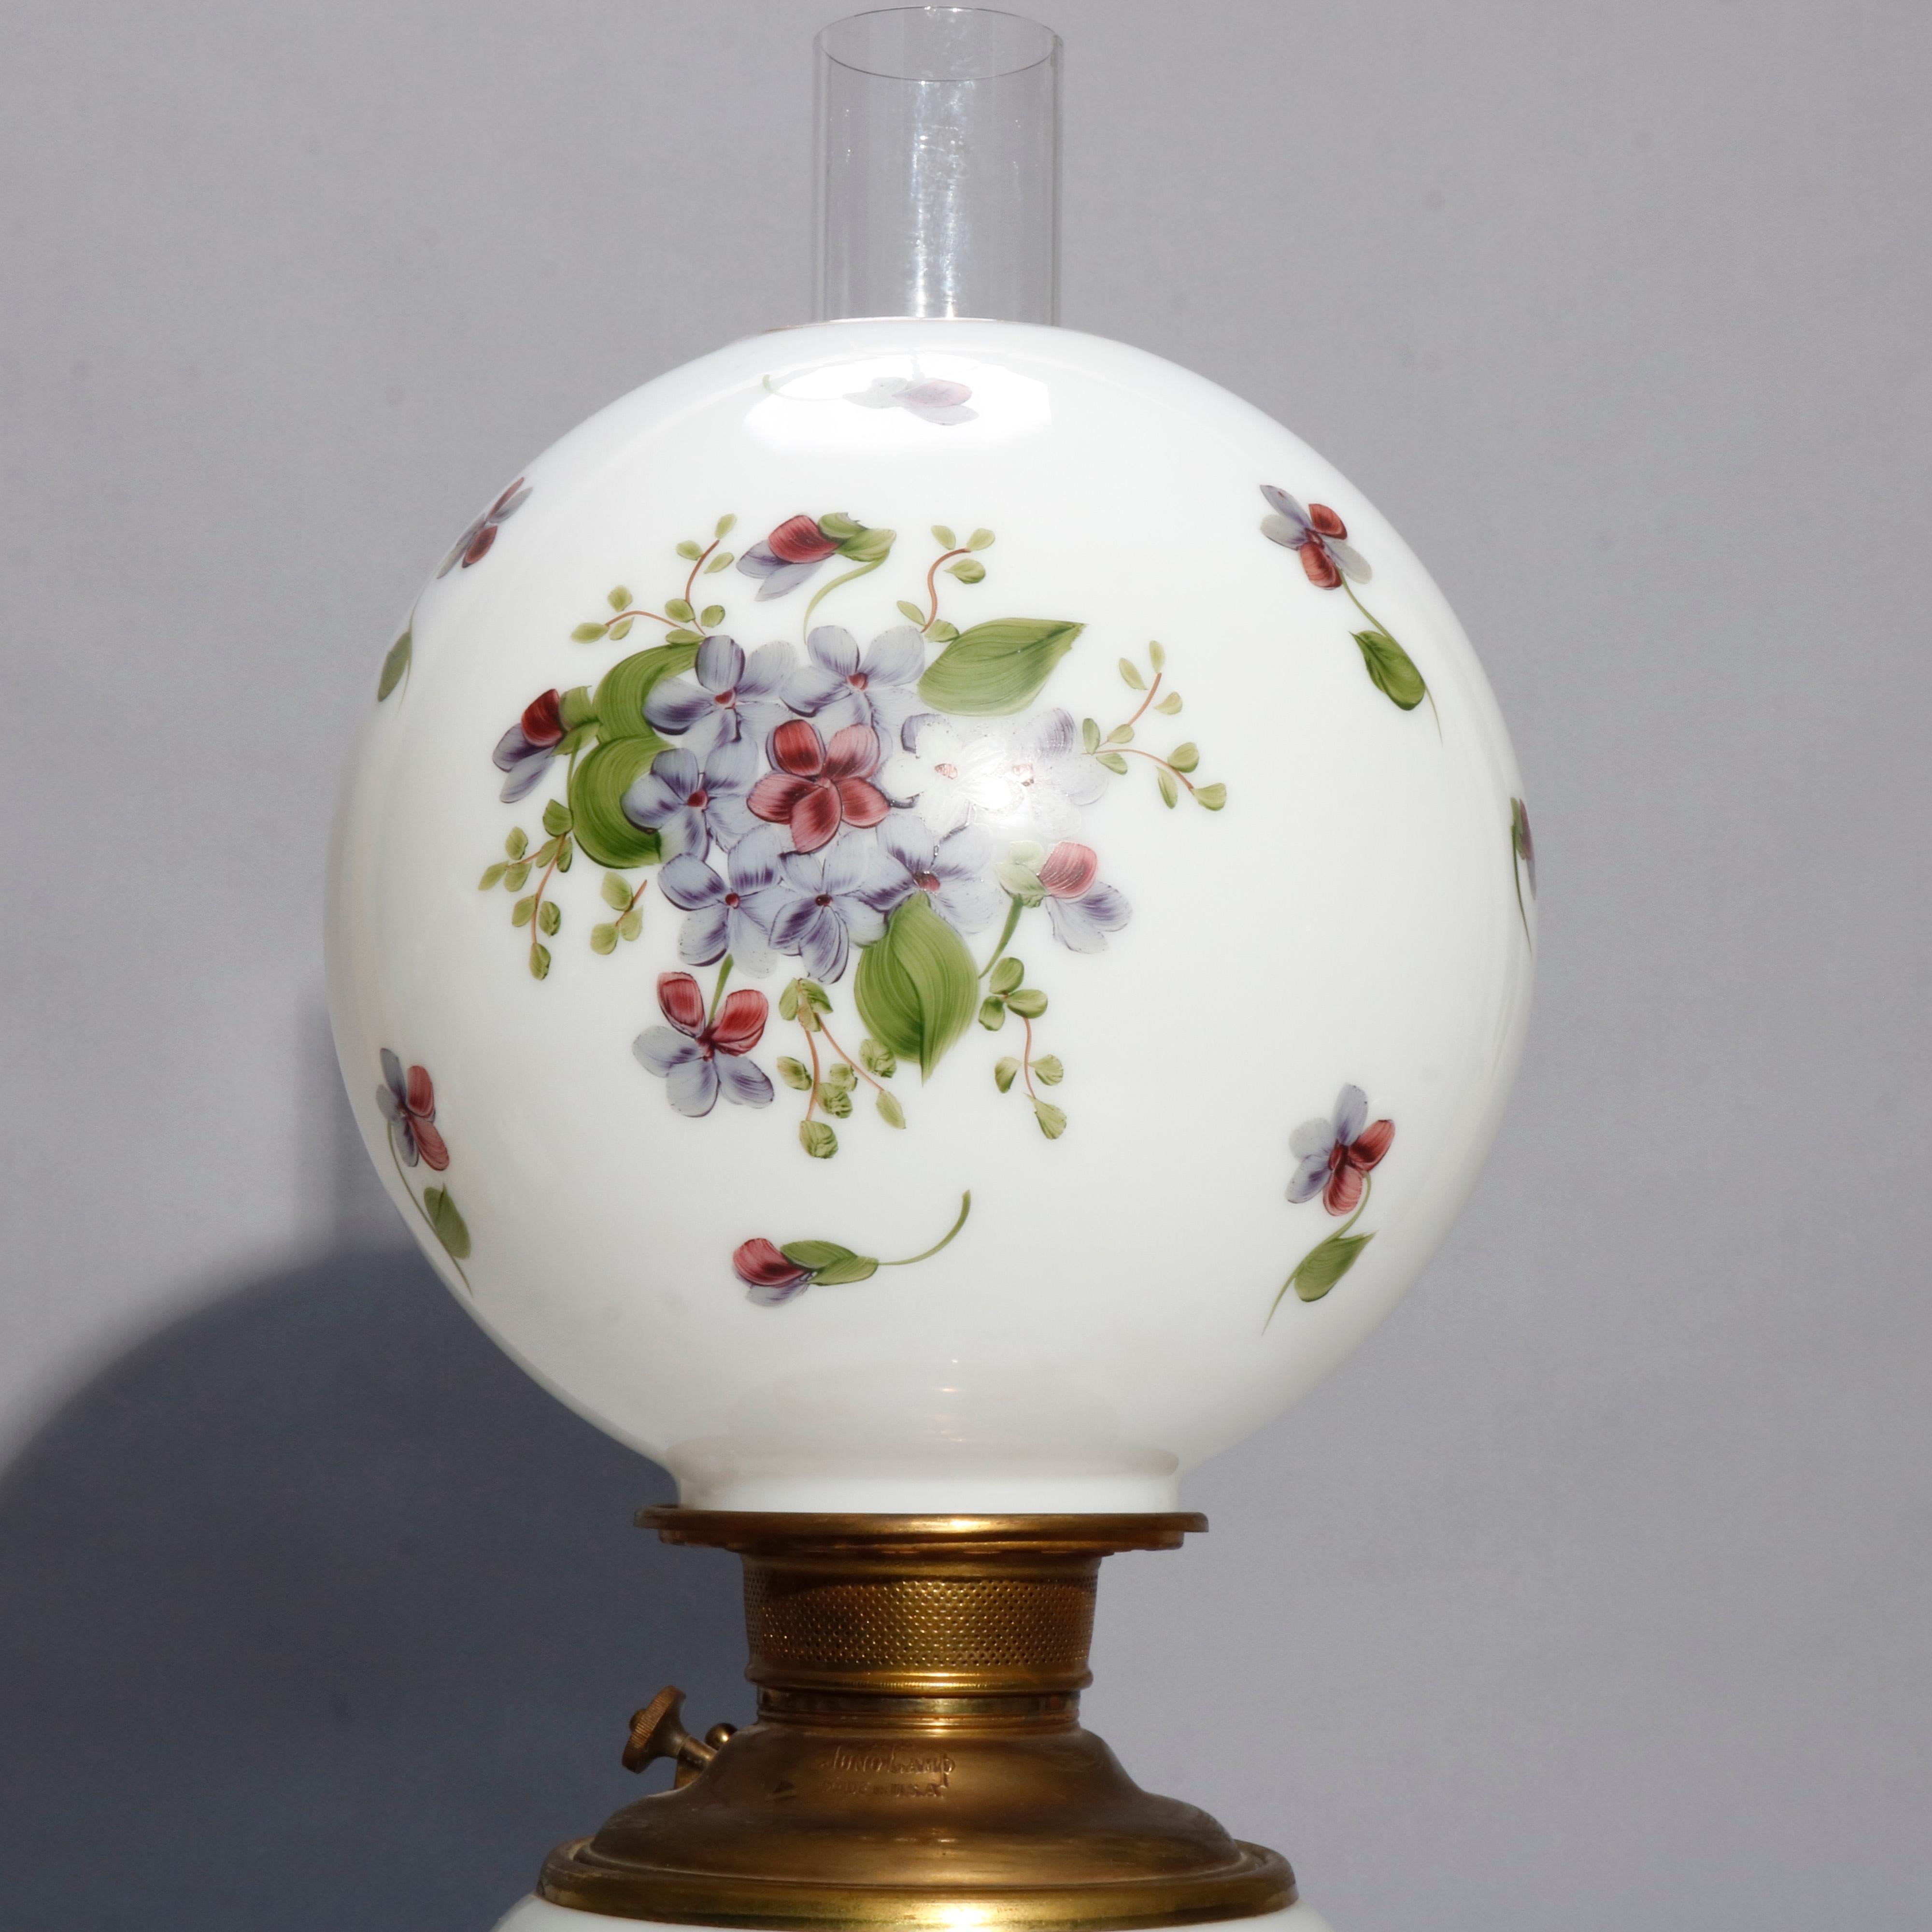 An antique Victorian Gone with The Wind table parlor lamp by Juno offers floral painted globe and base, signed as photographed, professionally rewired and working, 19th century.

Measures: 26.5